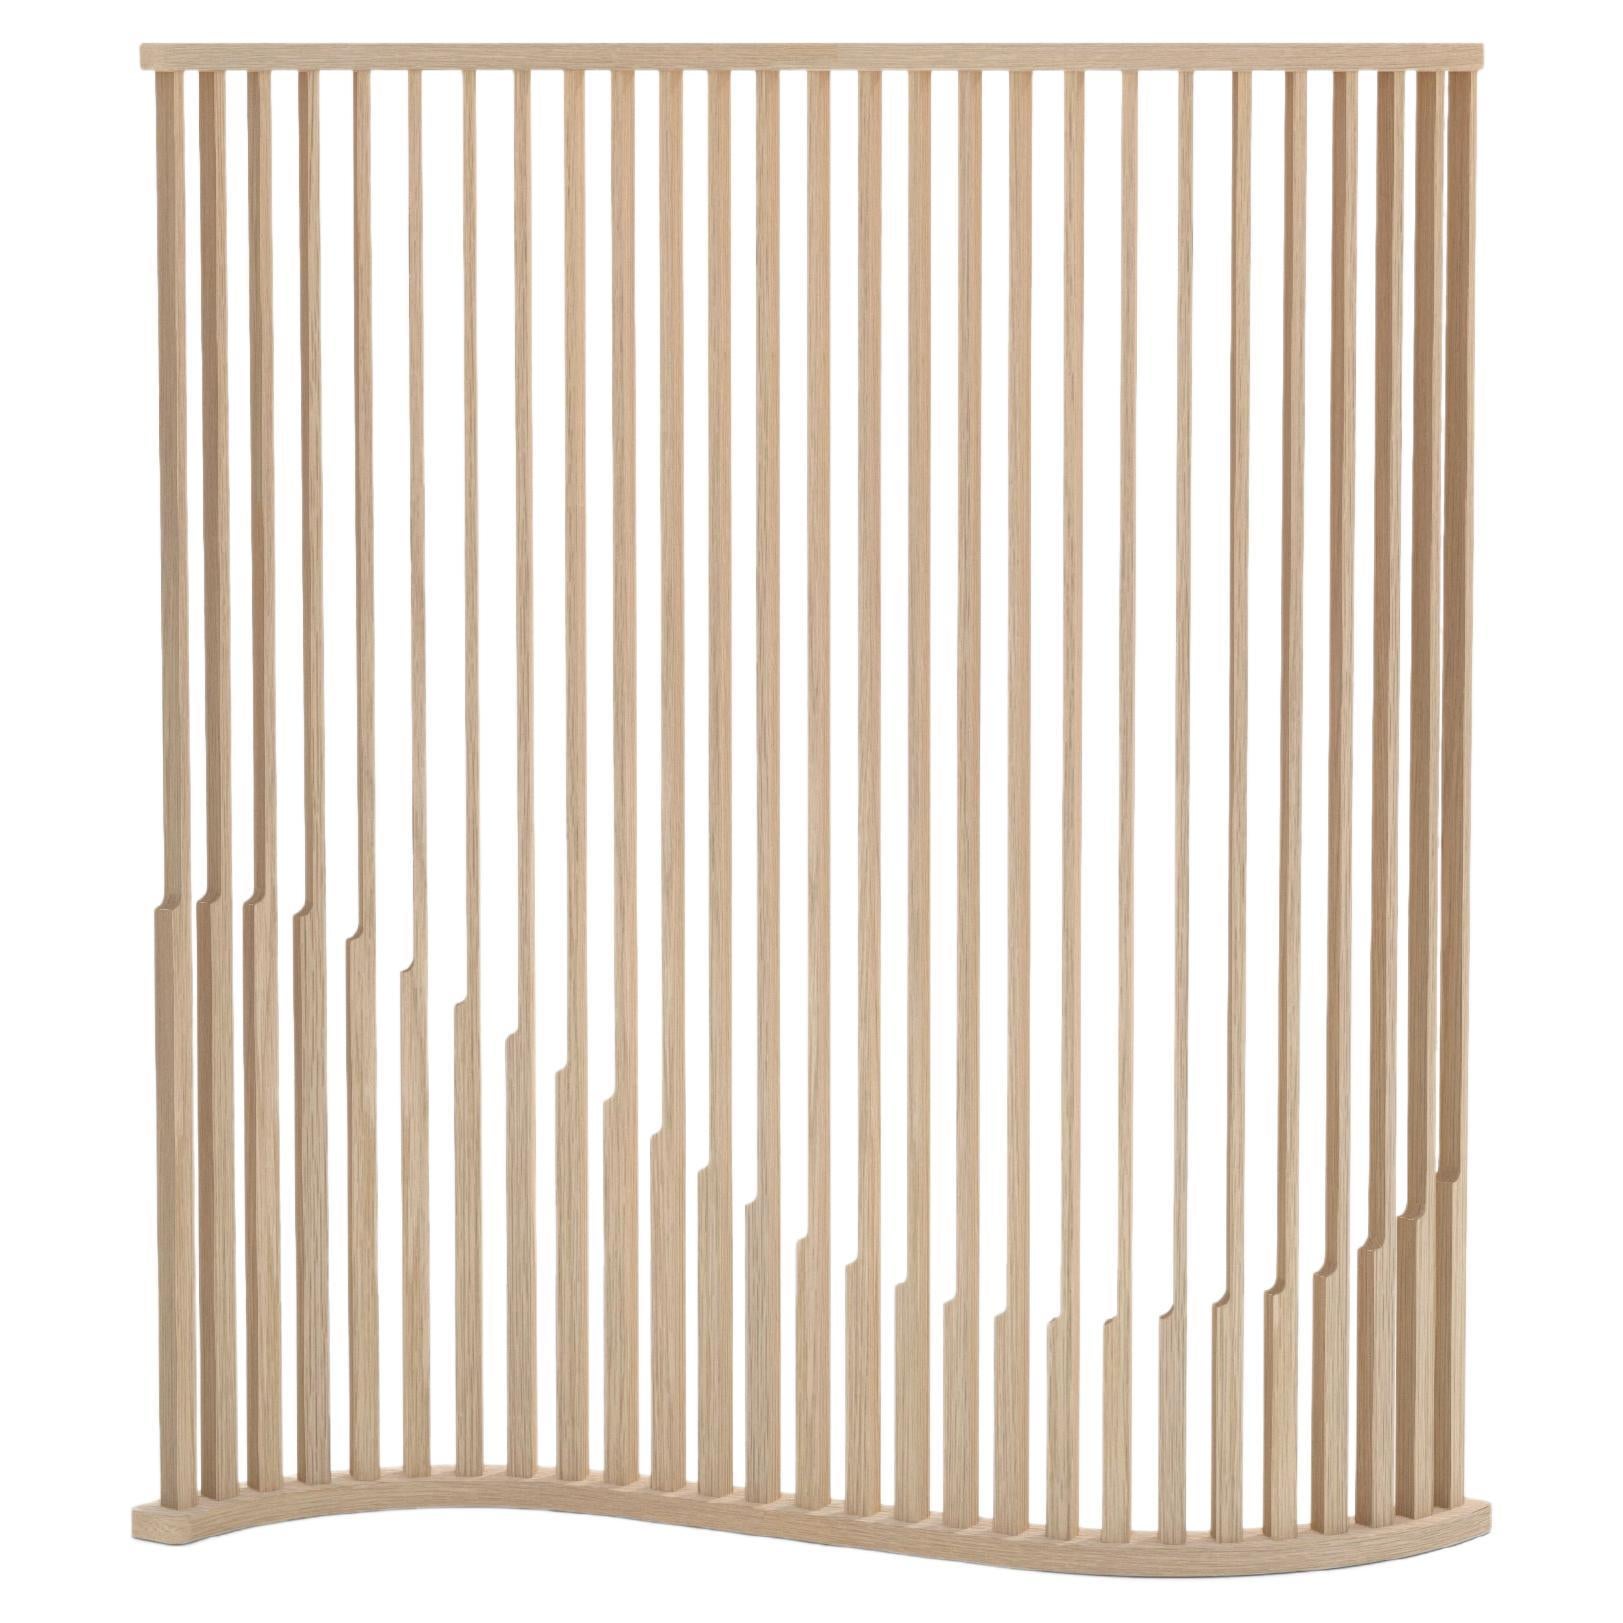 Laws of Motion Small Room Divider in Oak Wood, Screen by Joel Escalona